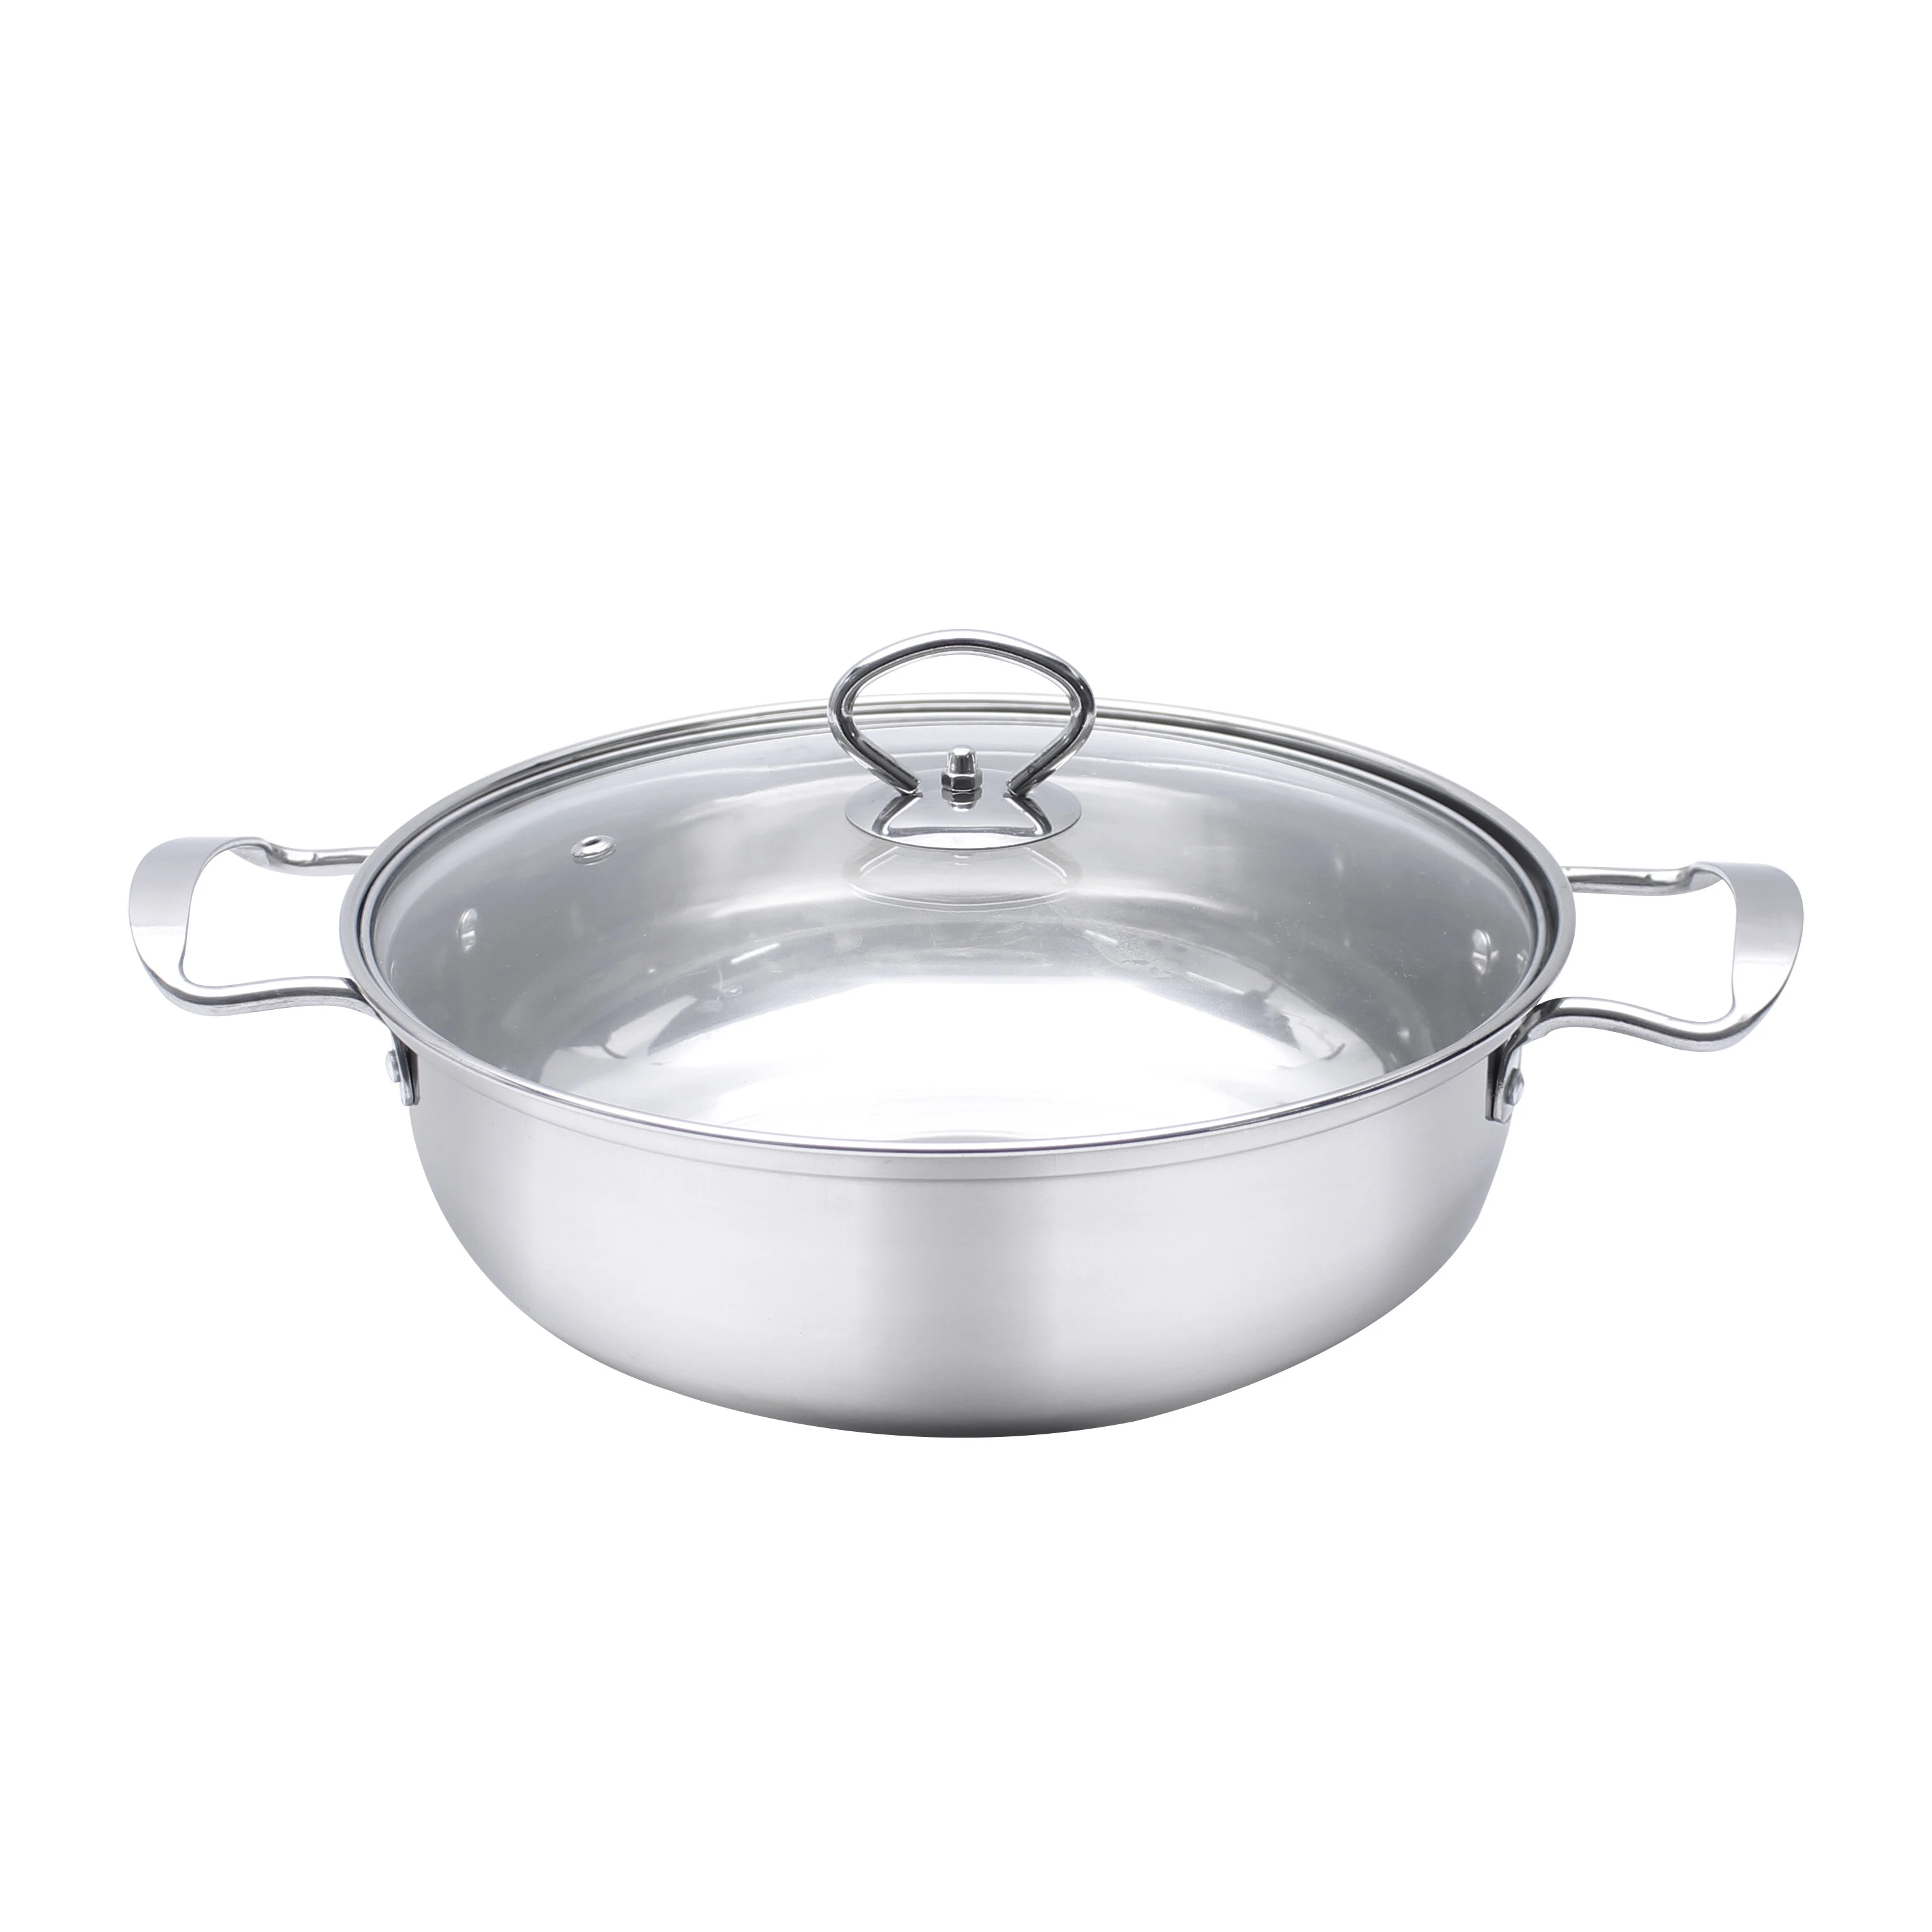 Best selling stainless steel hot pot/stock pot